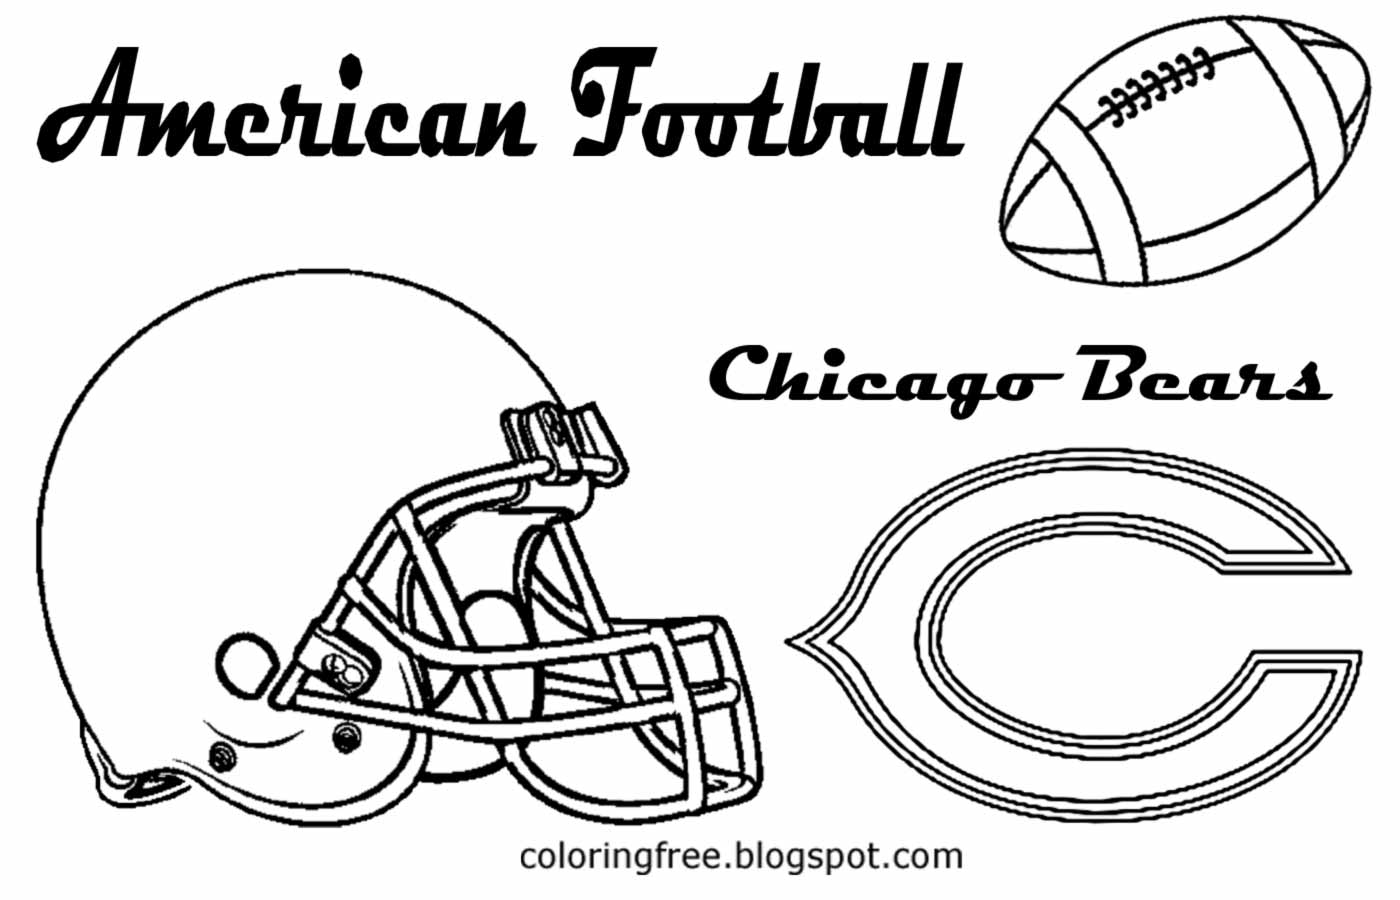 NFC Chicago Bears American football drawing pictures for teenagers USA sport game to print and color